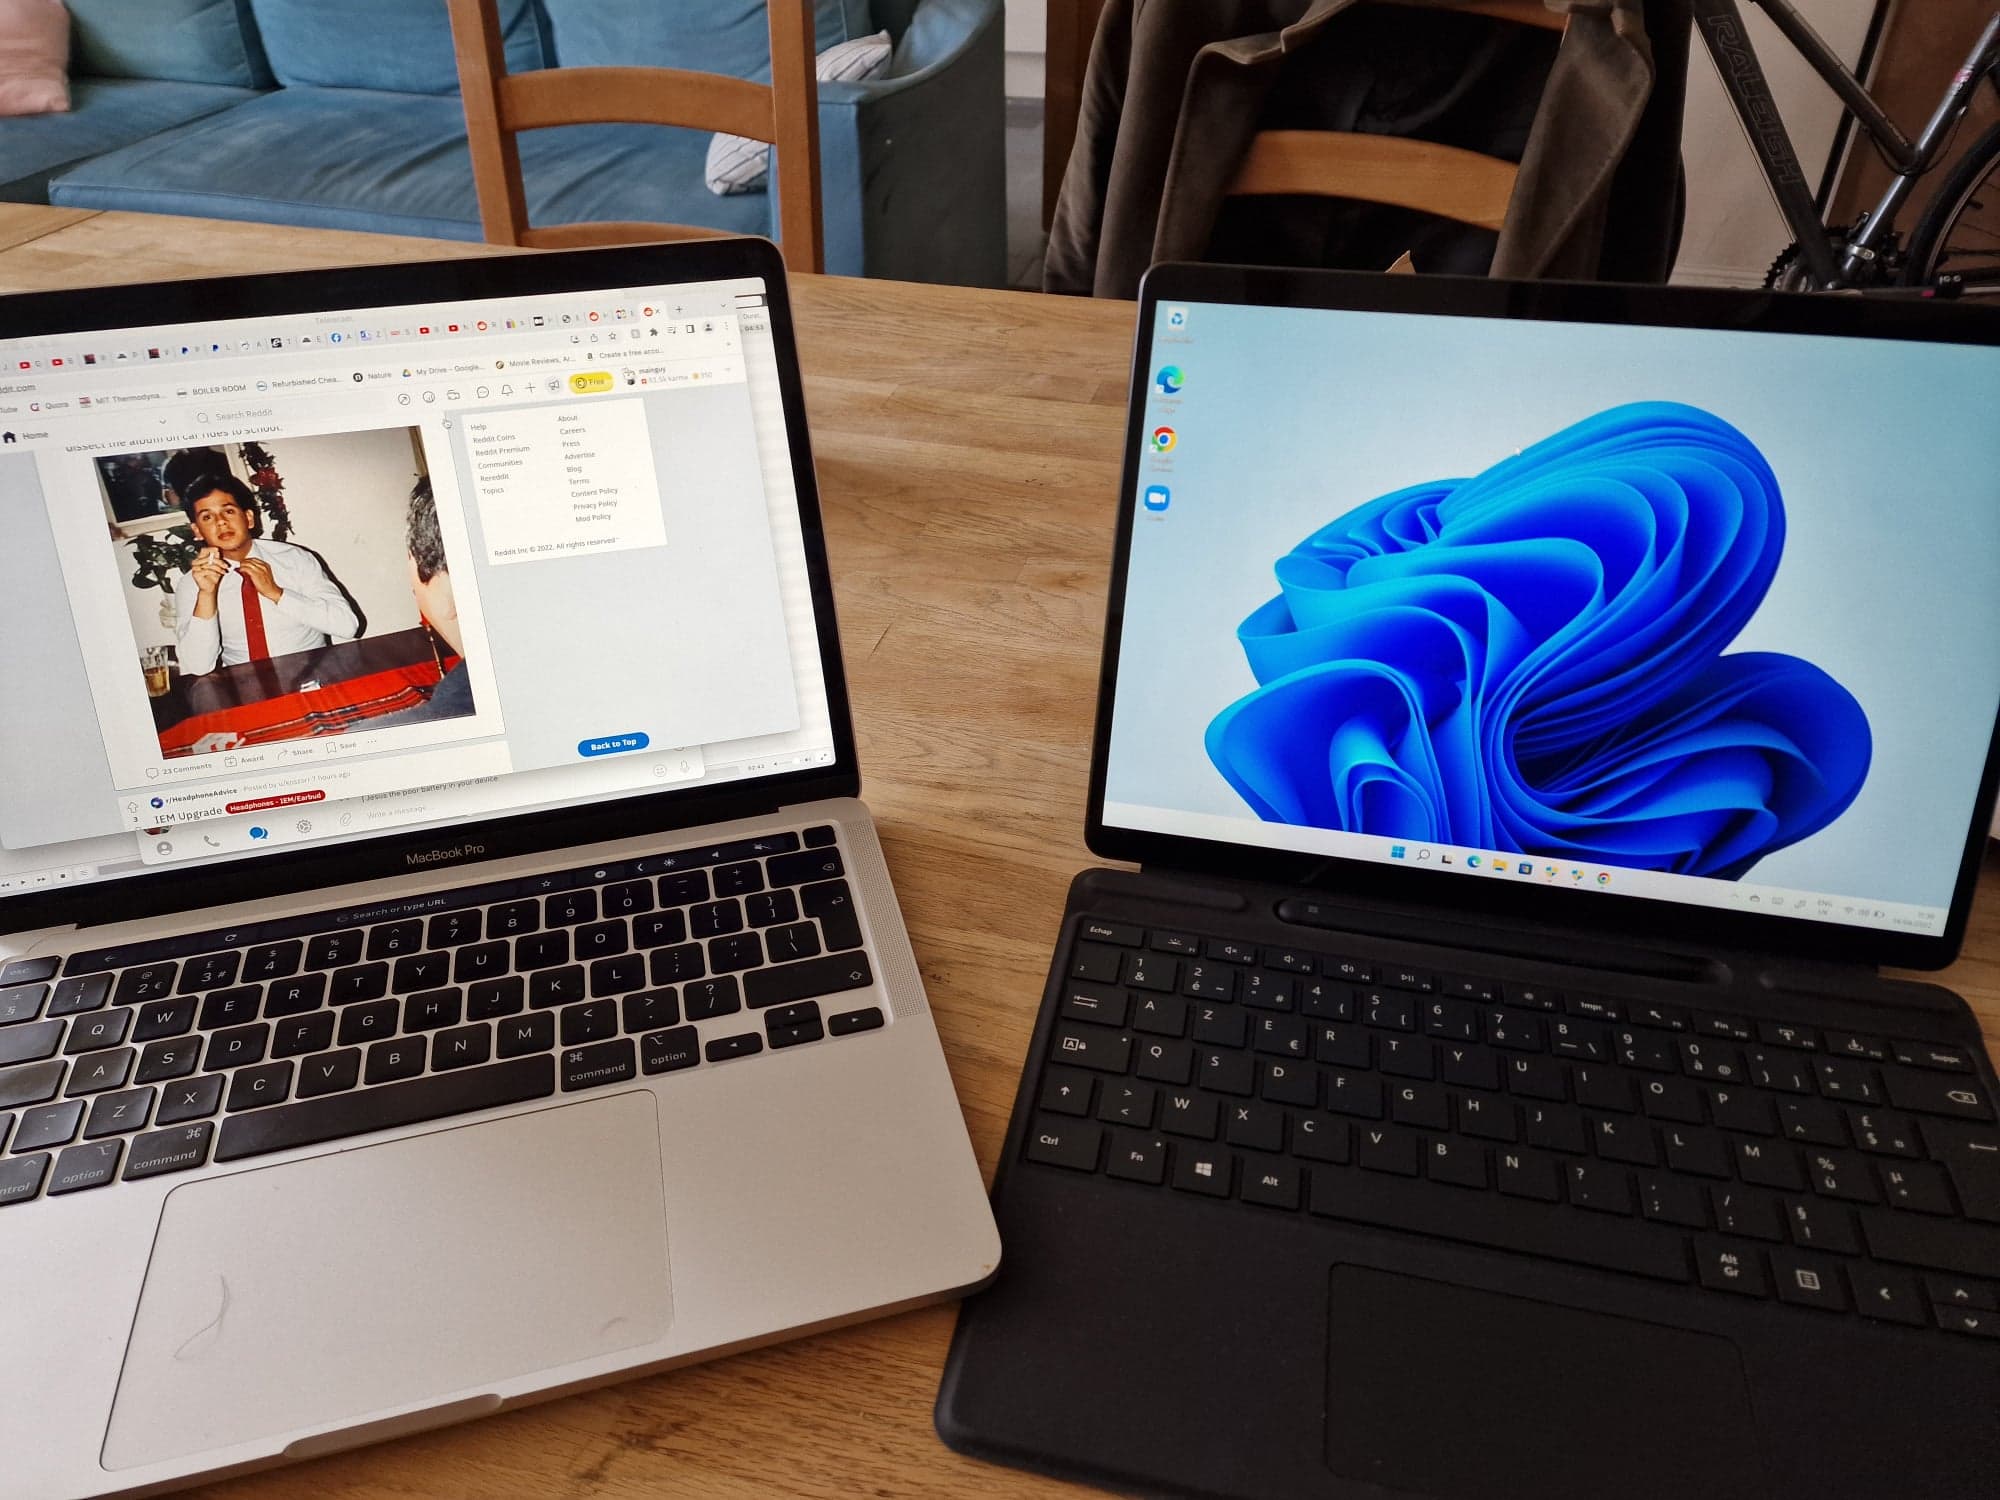 Microsoft Claims That the New Surface Pro Outperforms the 15″ M3 MacBook Air in Terms of Speed